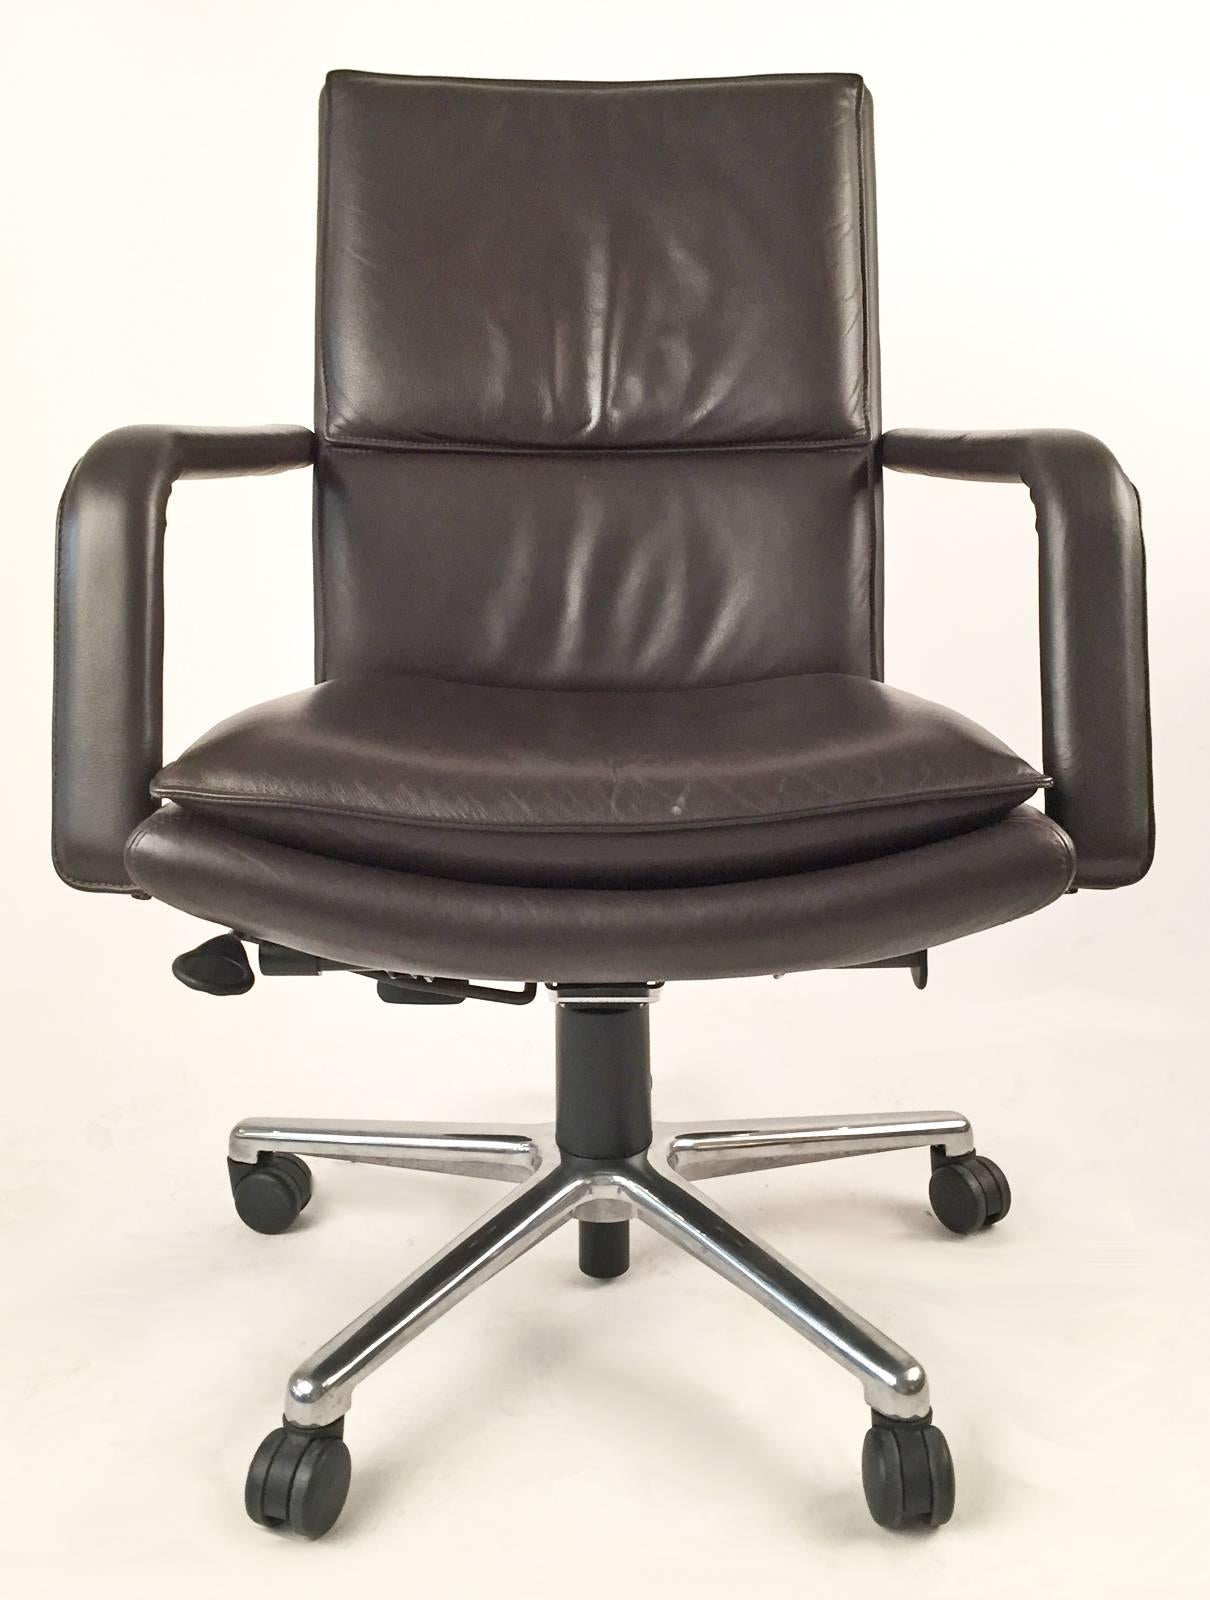 Pair of executive chairs made by Keilhauer. Elite 597 Medium back, swivel or knee tilt, casters, pneumatic height adjustment, upholstered leather with open-arm.
Price is for the pair. Measures: Overall height varies from 36.73 to 40.75". Seat